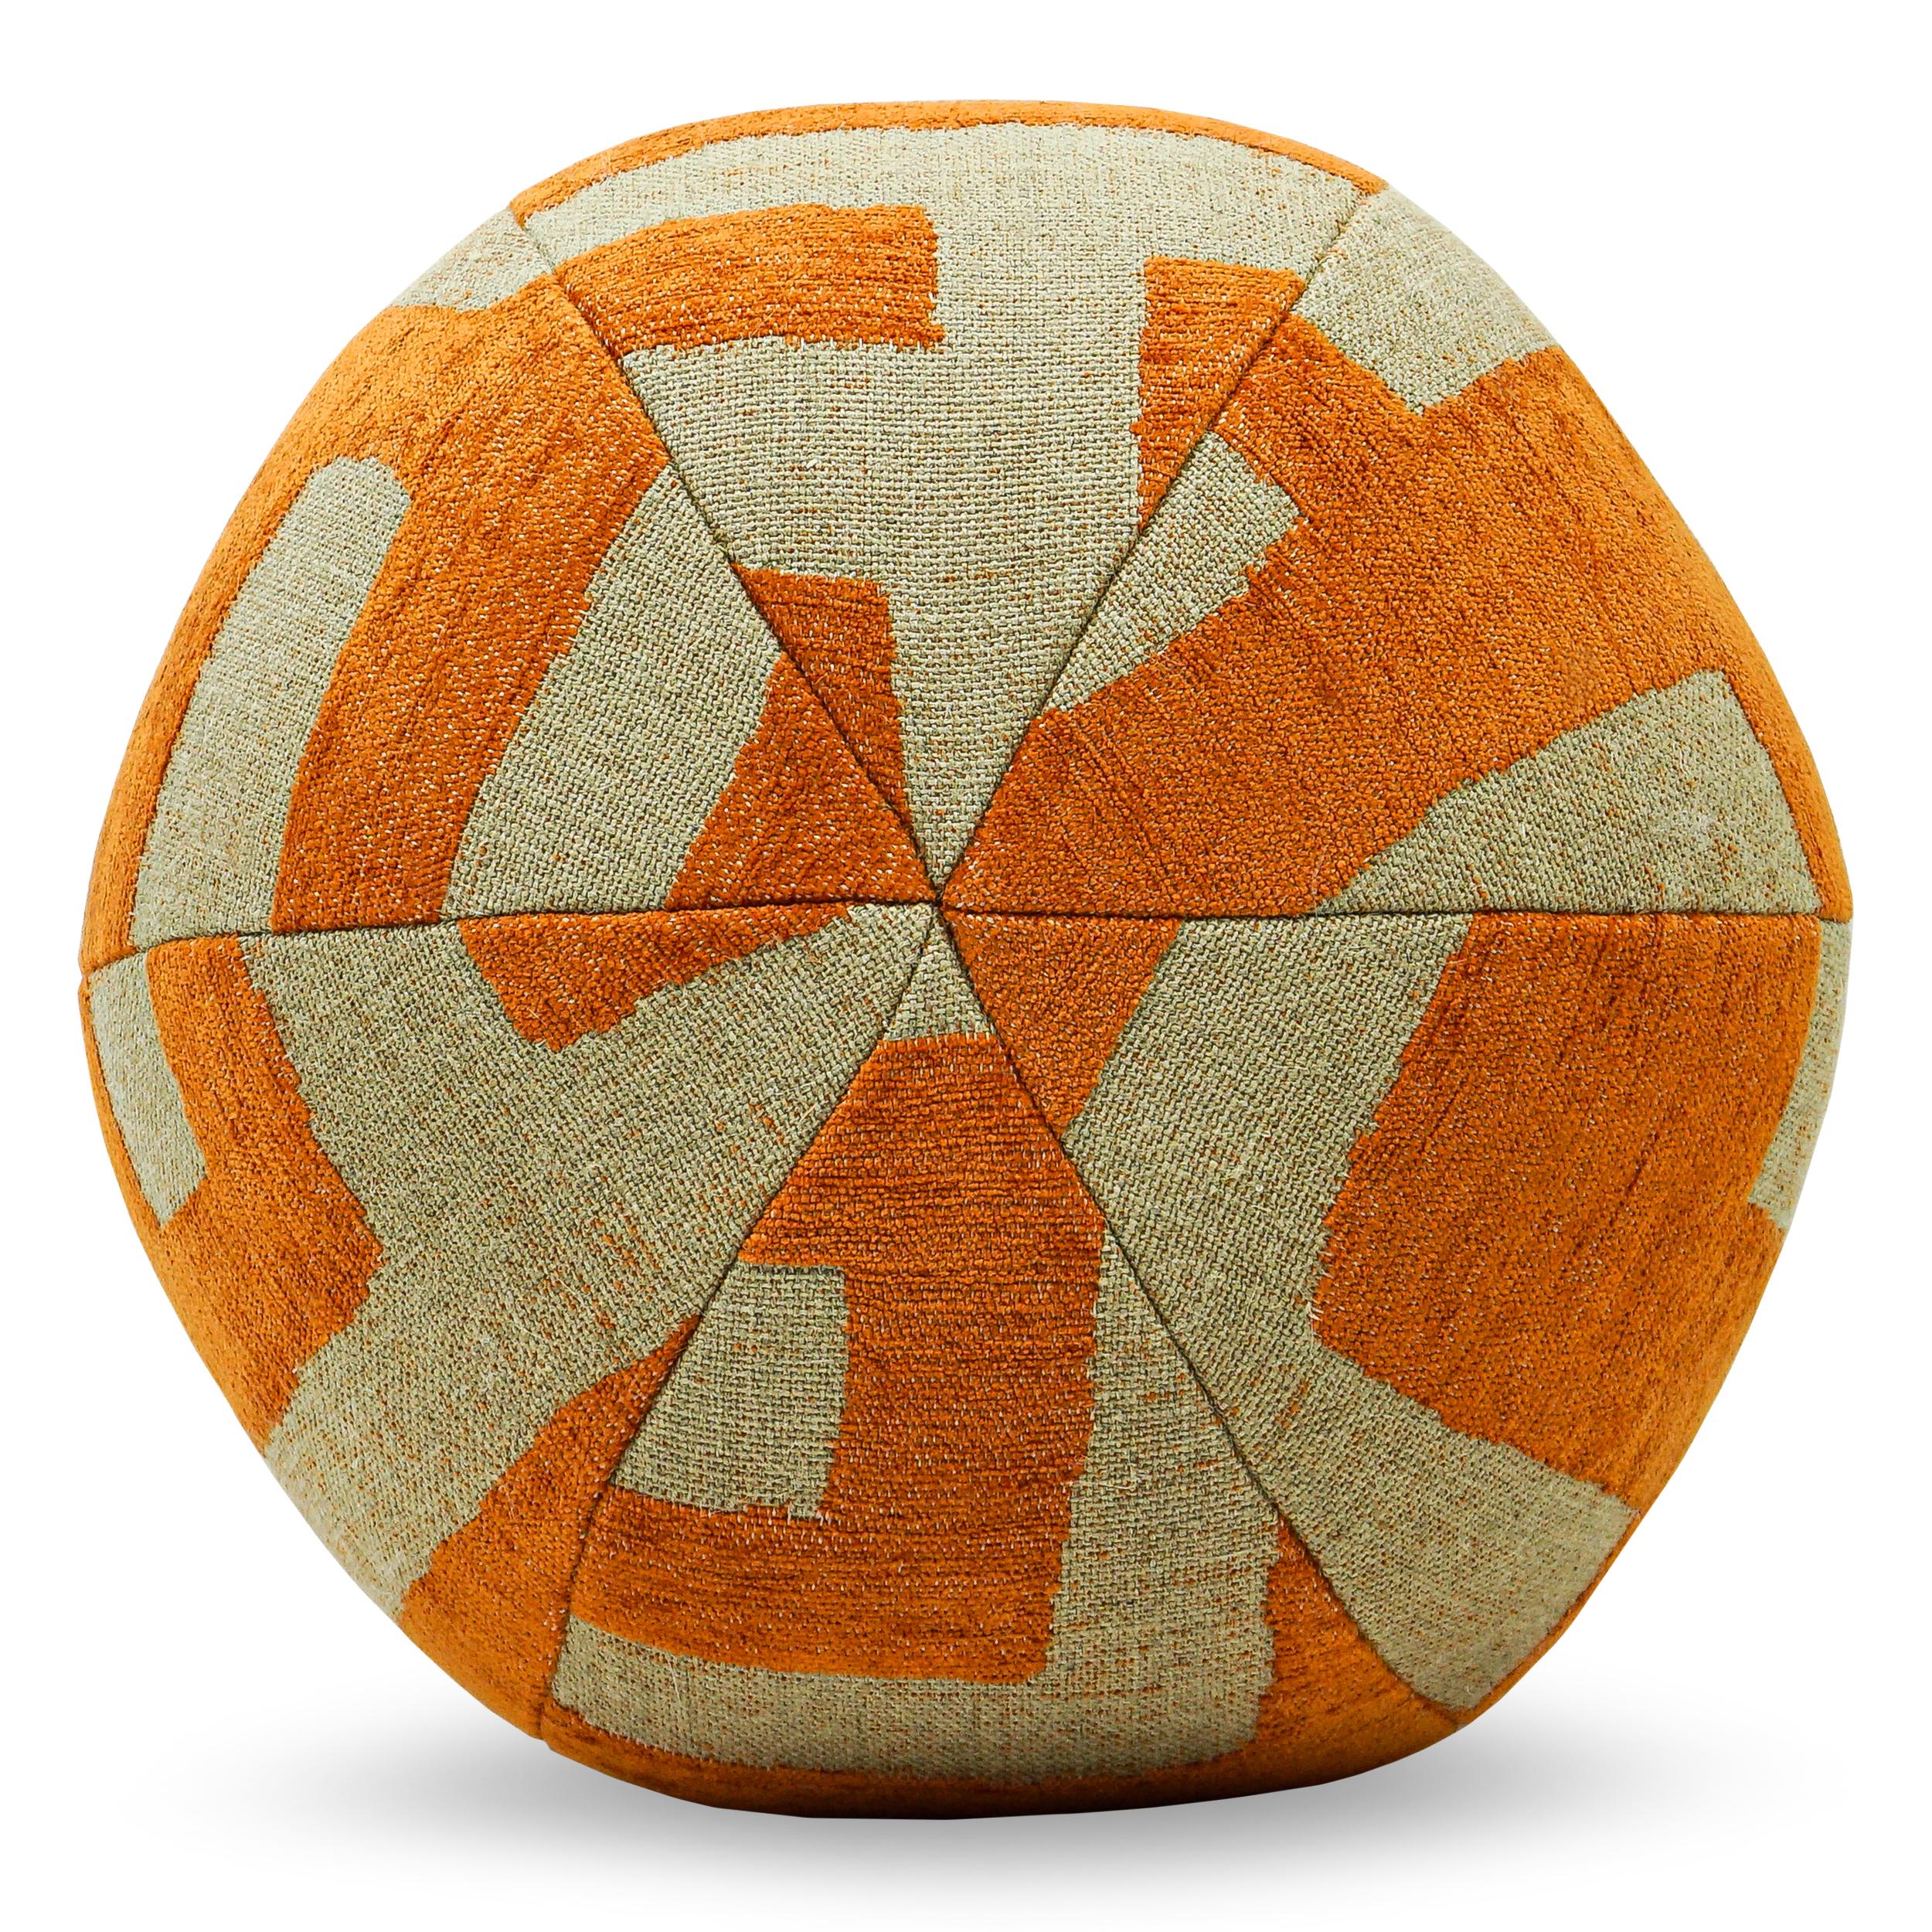 Romo Soft Velvet Fabric in a tribal pattern on a linen ground covers this ball pillow. Stuffed with a feather down blend. Ball can be made in any fabric. Ask for current availability of ball in fabric as shown. 

Measurements:
Overall: 12”W x